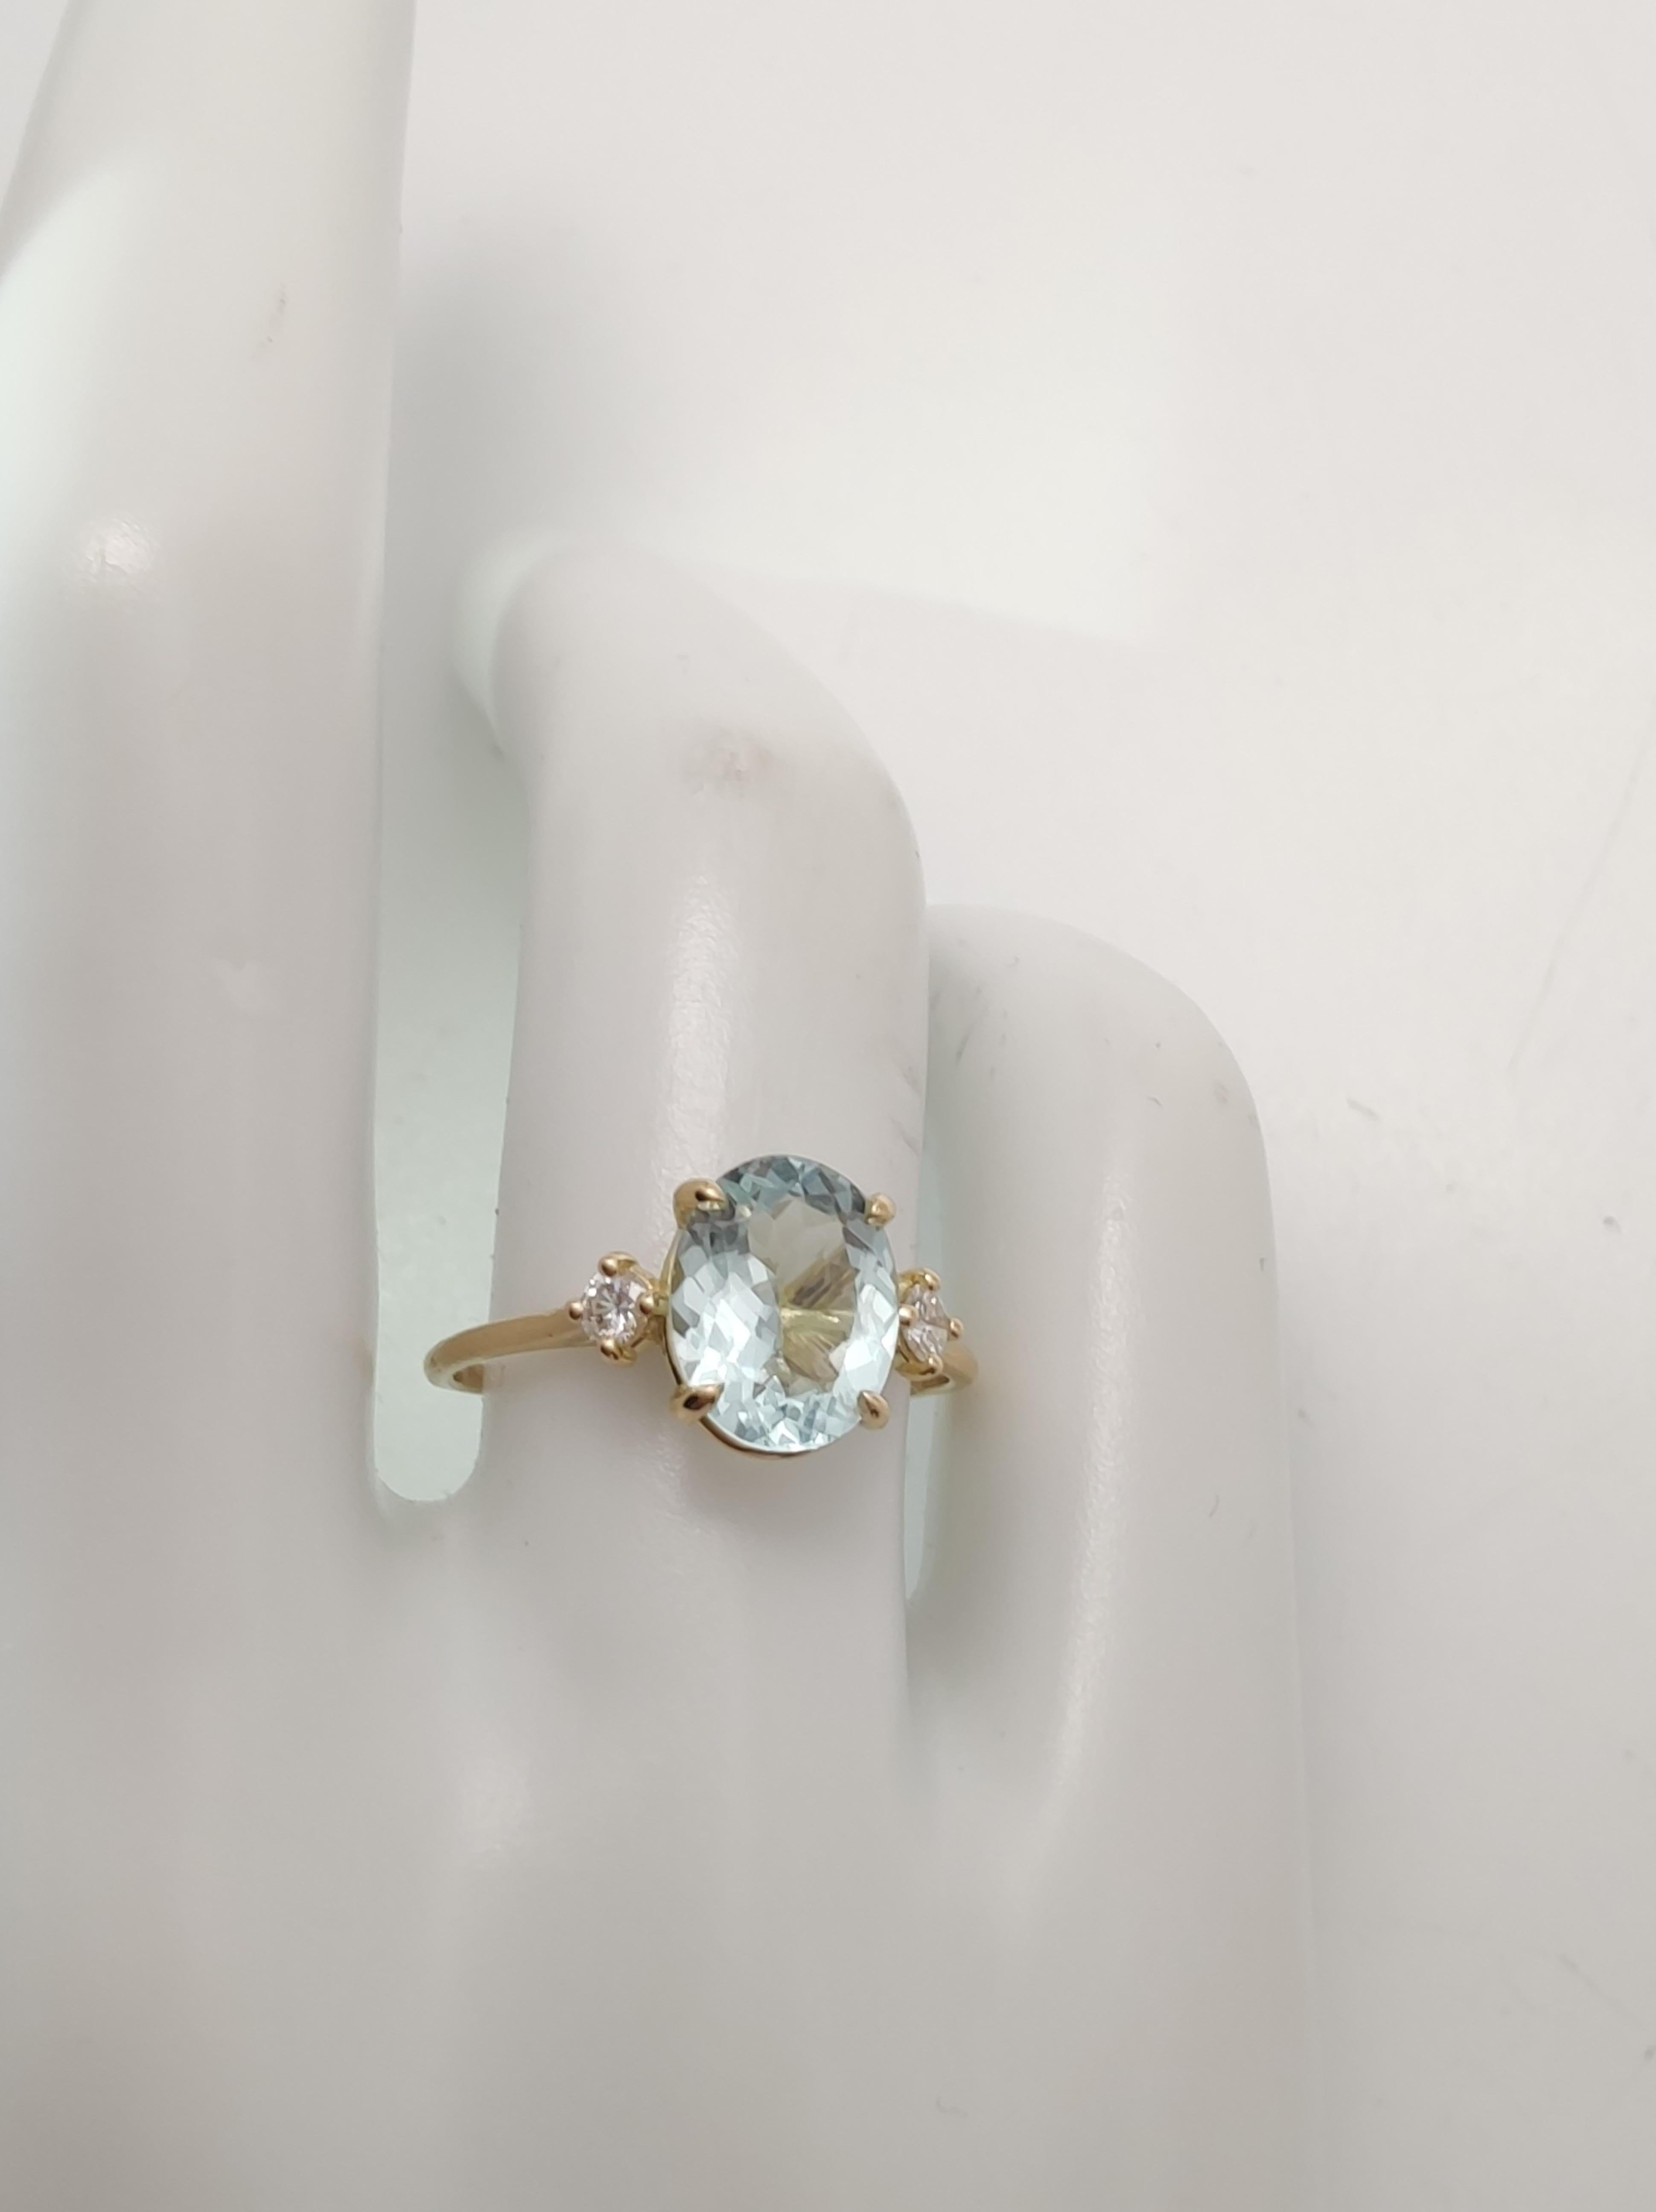 Oval Cut Flash sale 18K Gold Ring for women-1.6ct  oval Aquamarine 0.13ct diamonds  For Sale